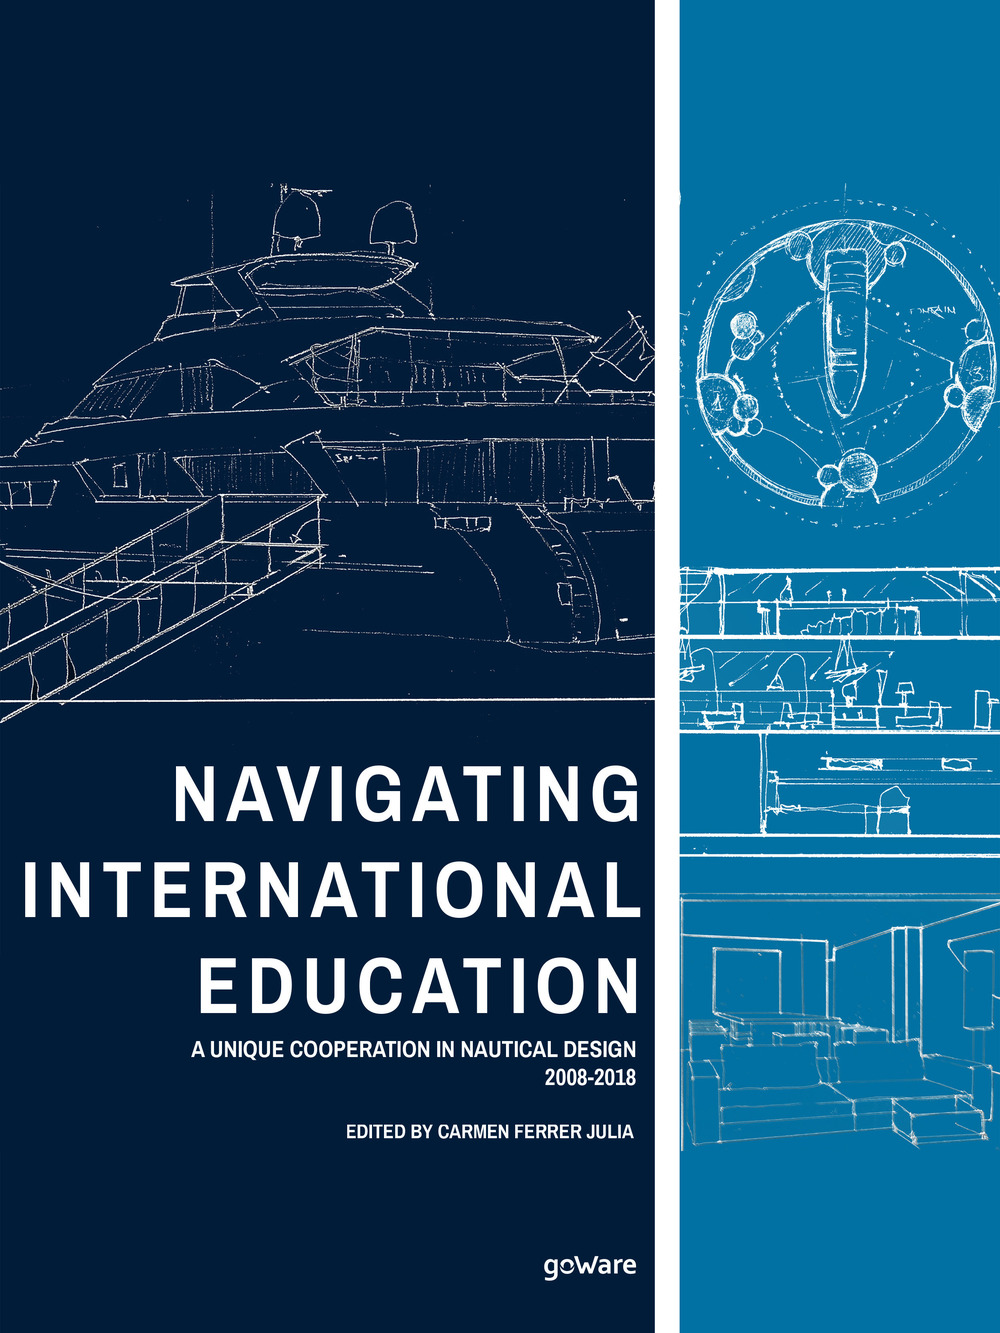 Navigating international education. A unique cooperation in nautical design 2008-2018